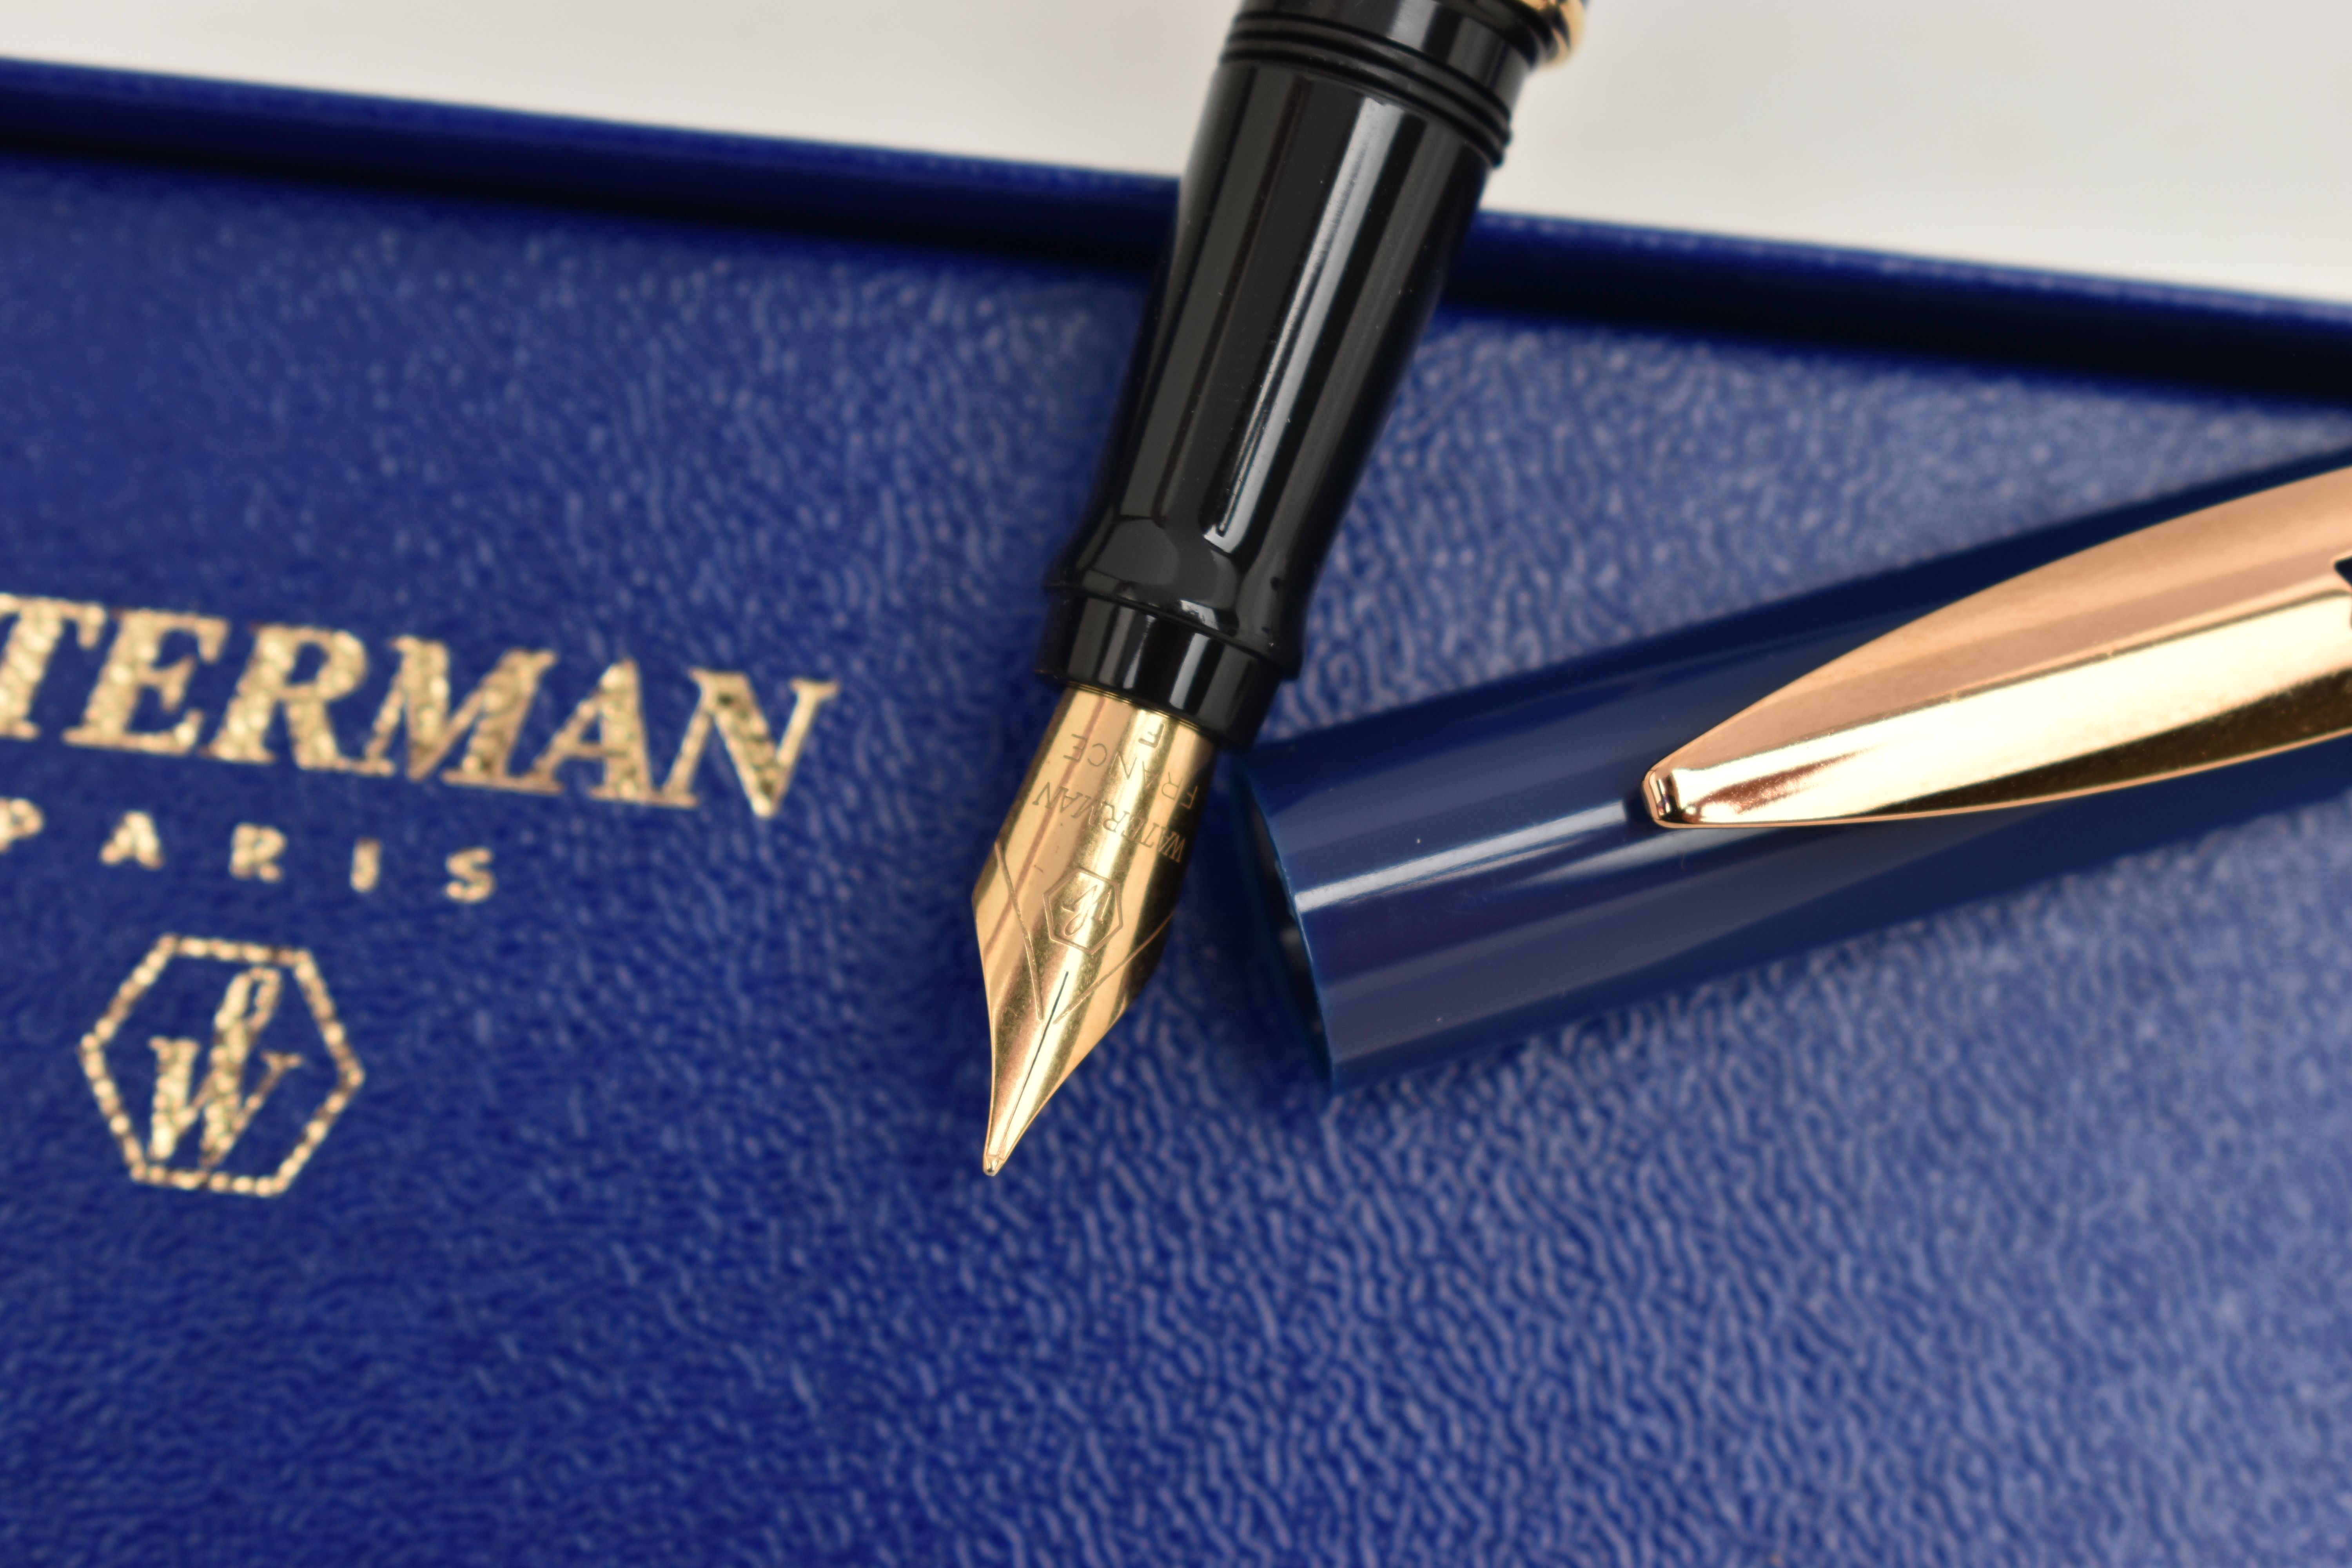 TWO BOXED 'WATERMAN' FOUNTAIN PENS, blue lacquer pens, signed to each collar 'Waterman', both fitted - Image 5 of 5